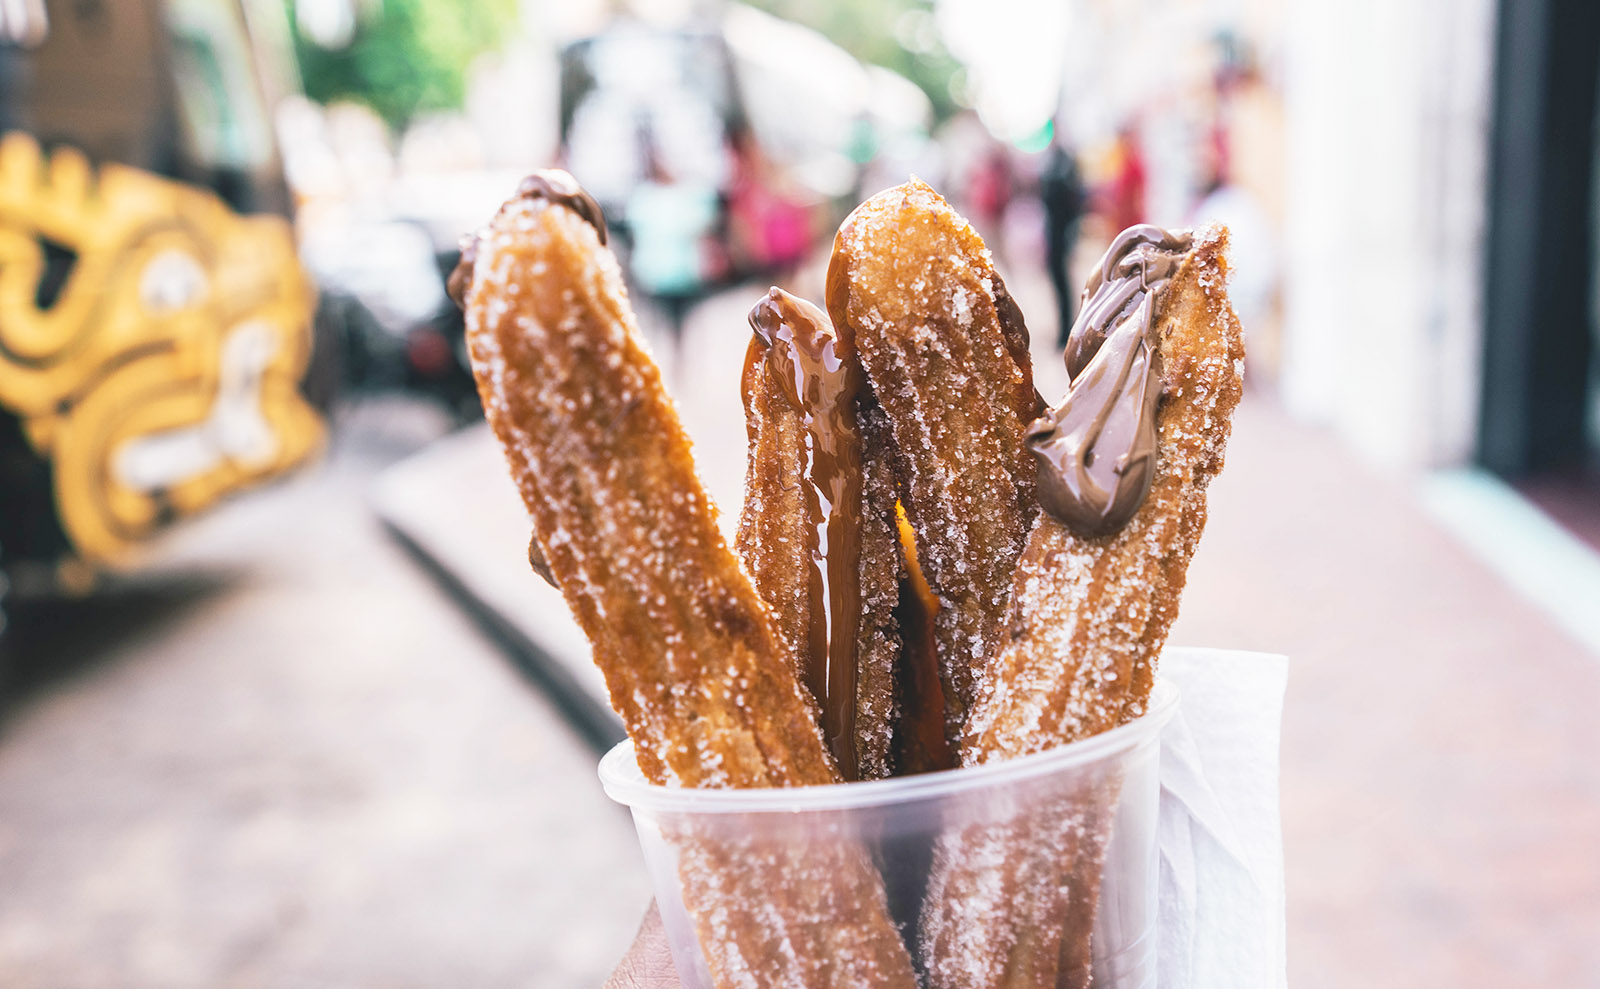 paper cone of churros with chocolate sauce